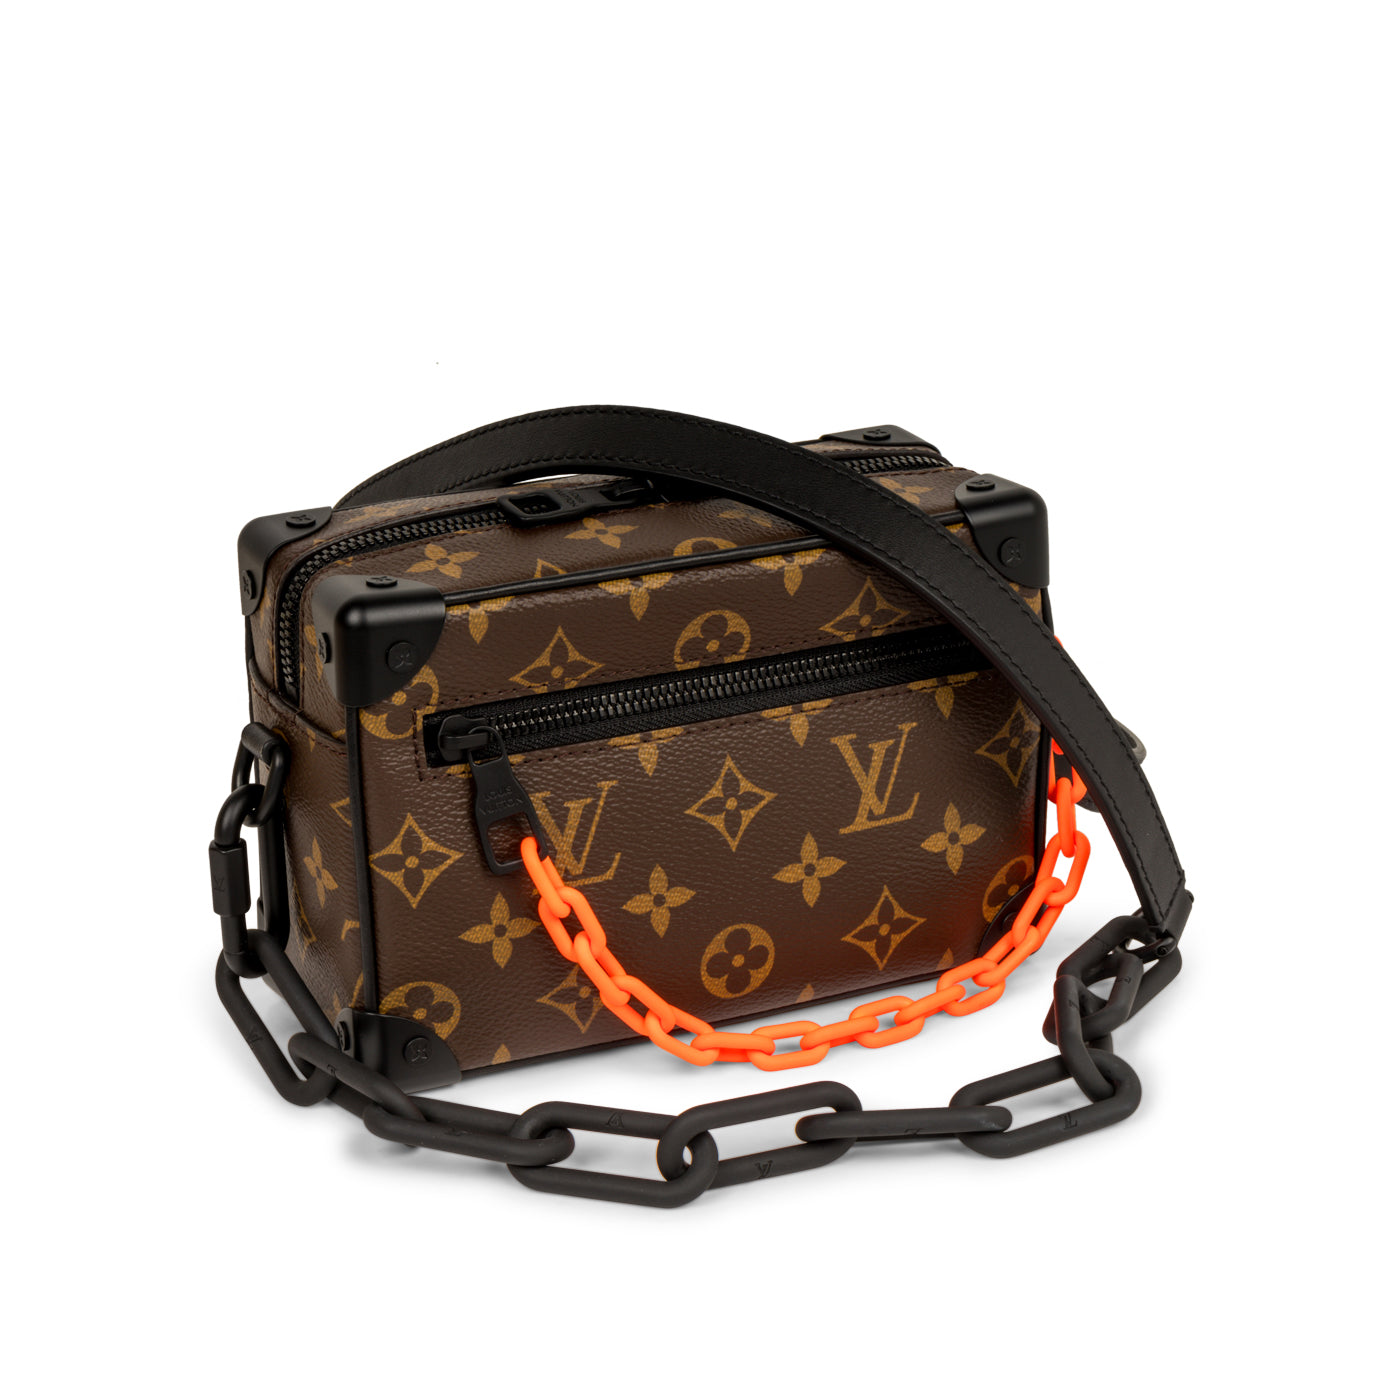 Louis Vuitton - SS19 Soft Trunk - Virgil Abloh - Sold out - Brand New ...